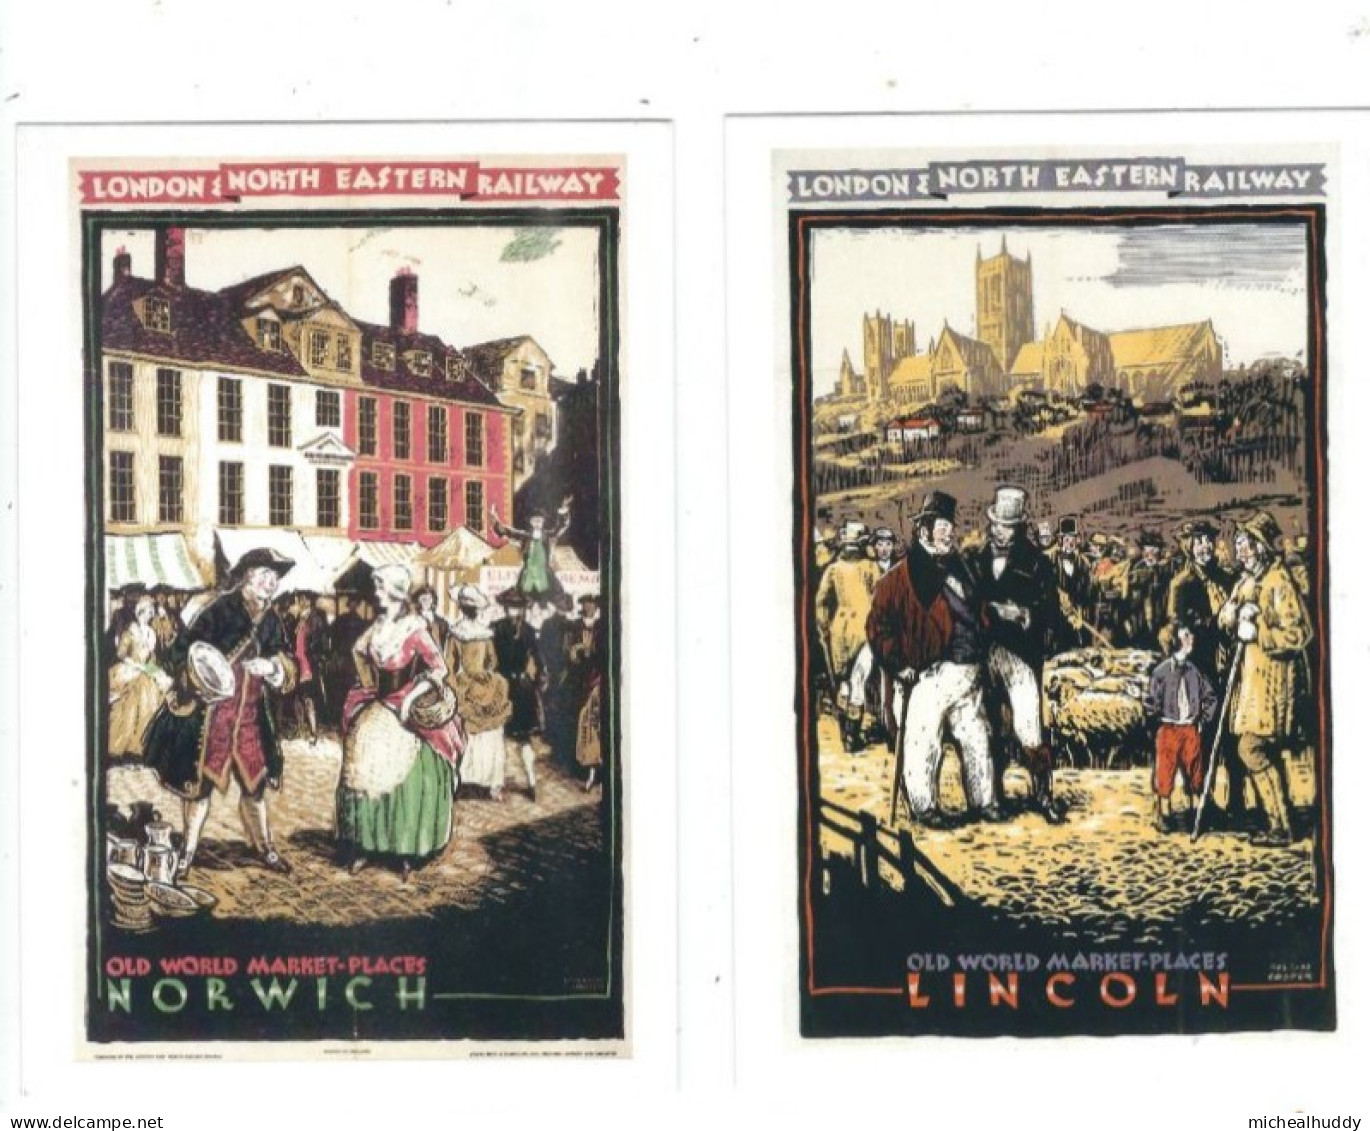 2 POSTCARDS UK RAIL ADVERTISING  LNER OLD WORTLD MARKET PLACES  LINCOLN/ NORWICH - Publicidad